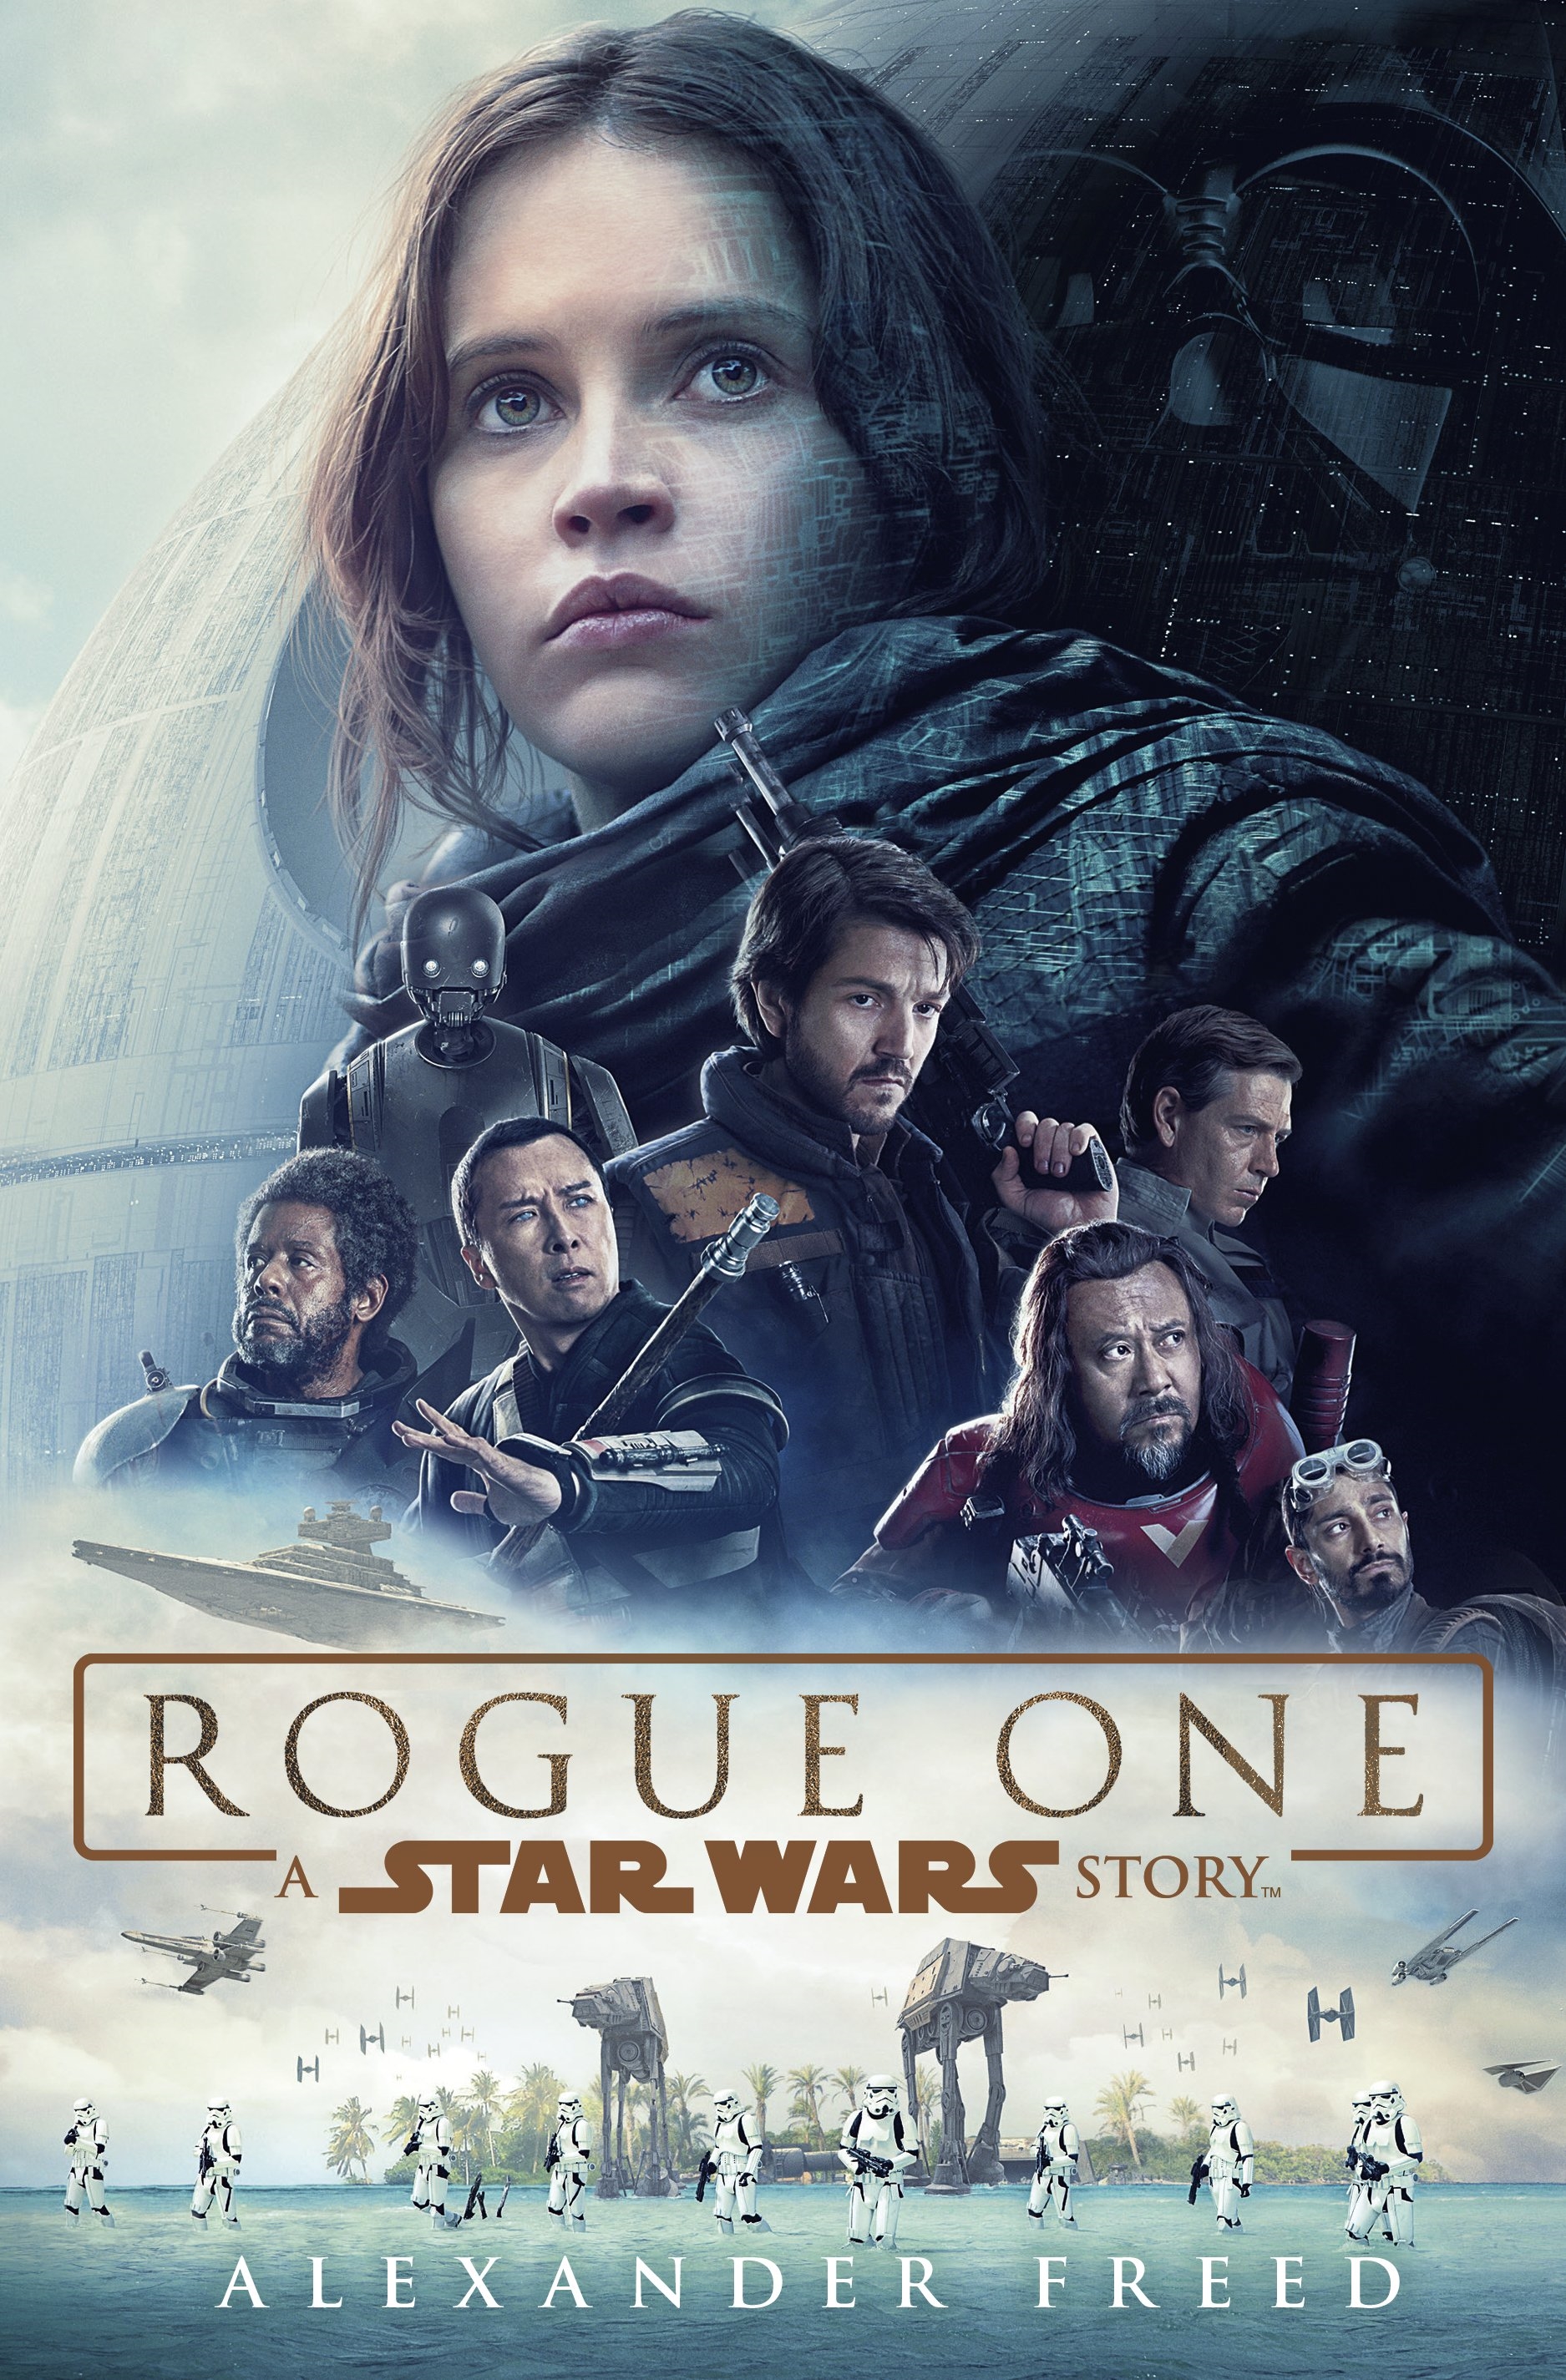 Friday Reads: Rogue One by Alexander Freed